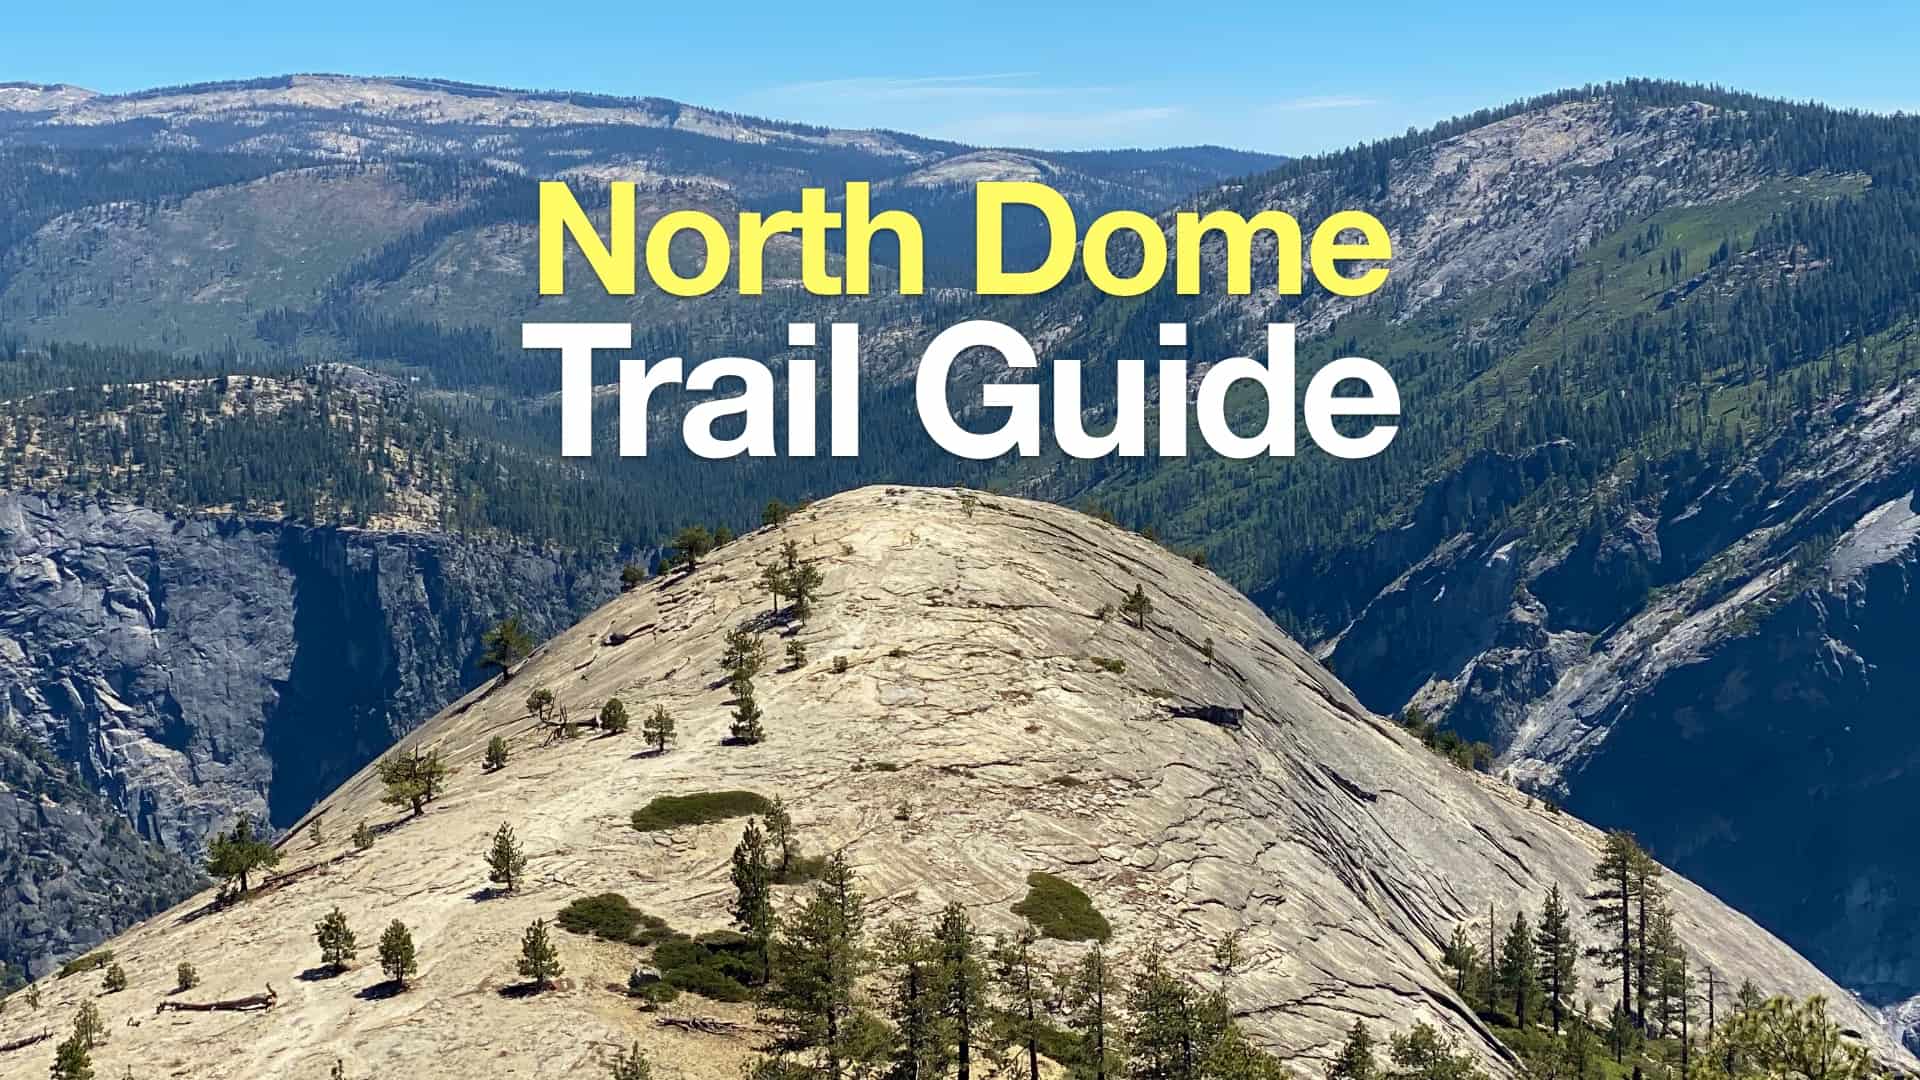 Half Dome Post-Rock Fall Conditions: One Year Later